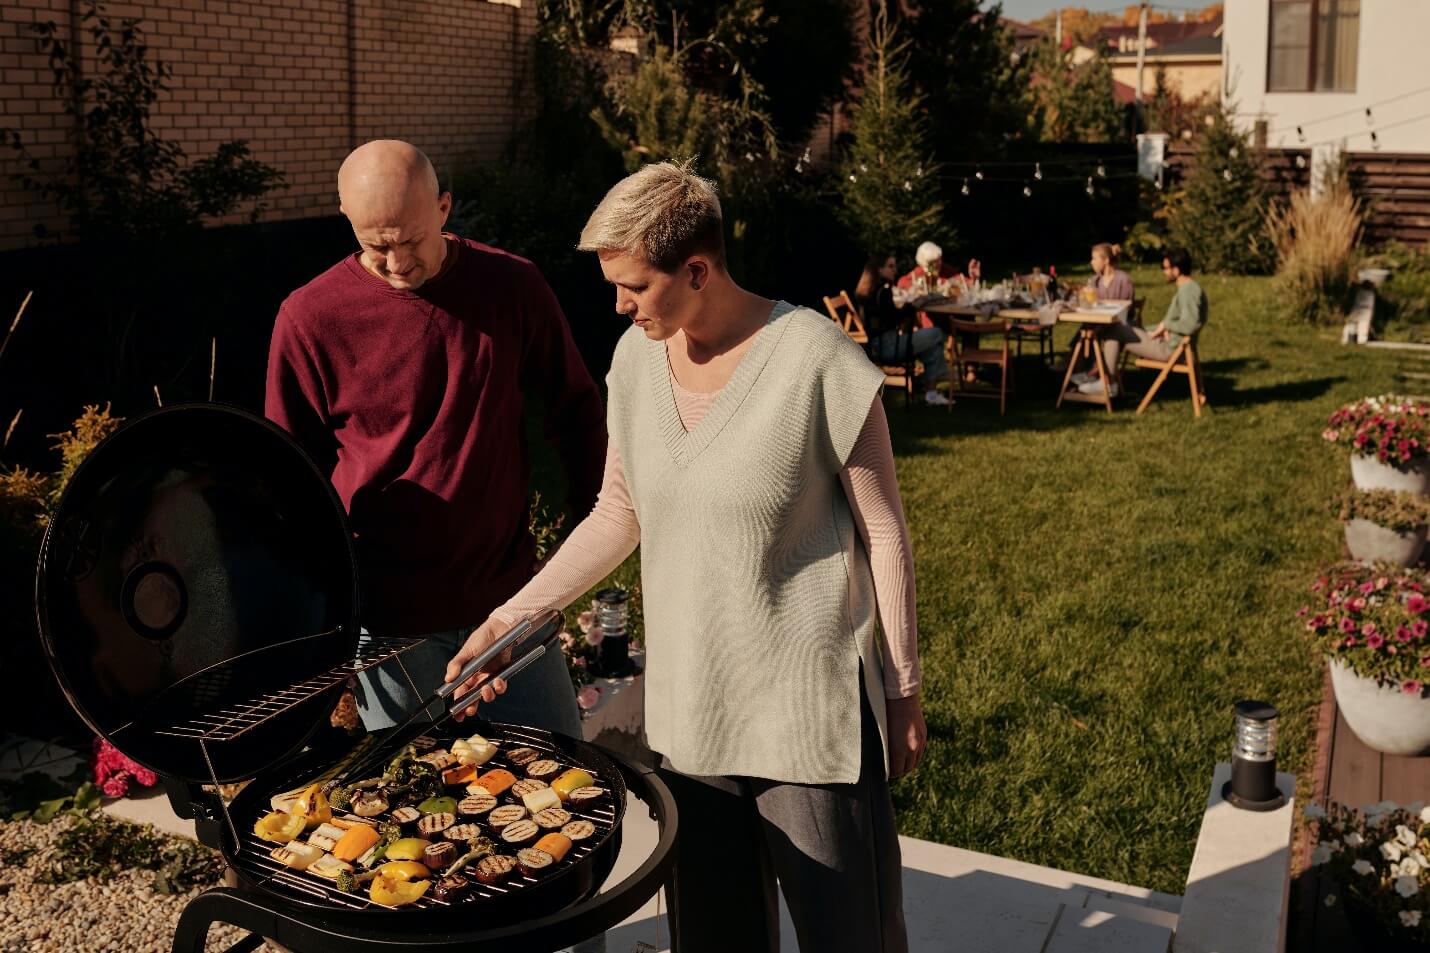 A person and person cooking food on a grill

Description automatically generated with low confidence